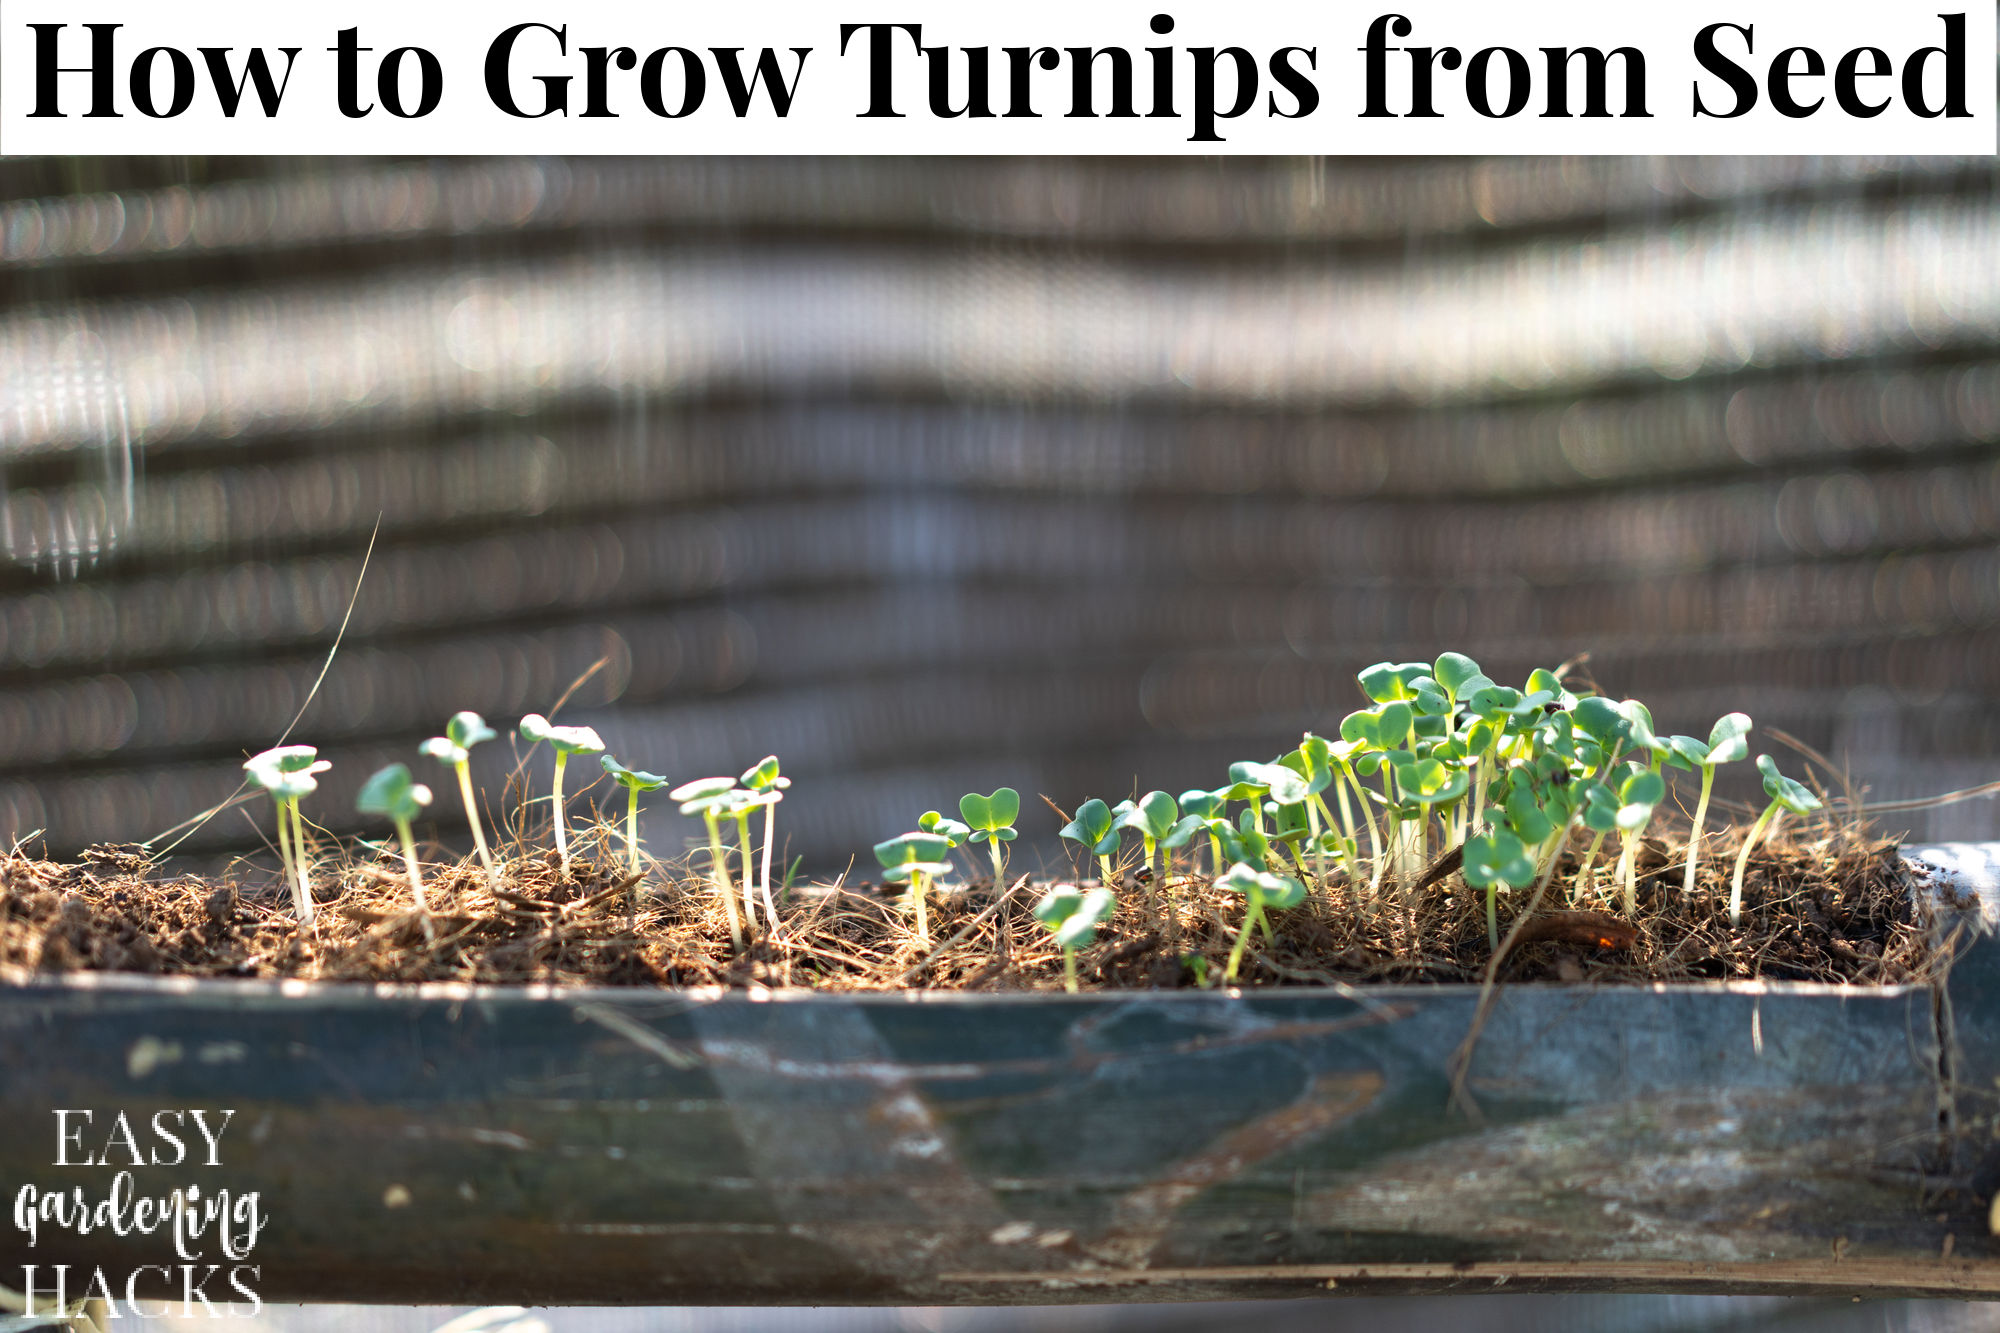 How to Grow Turnips from Seed